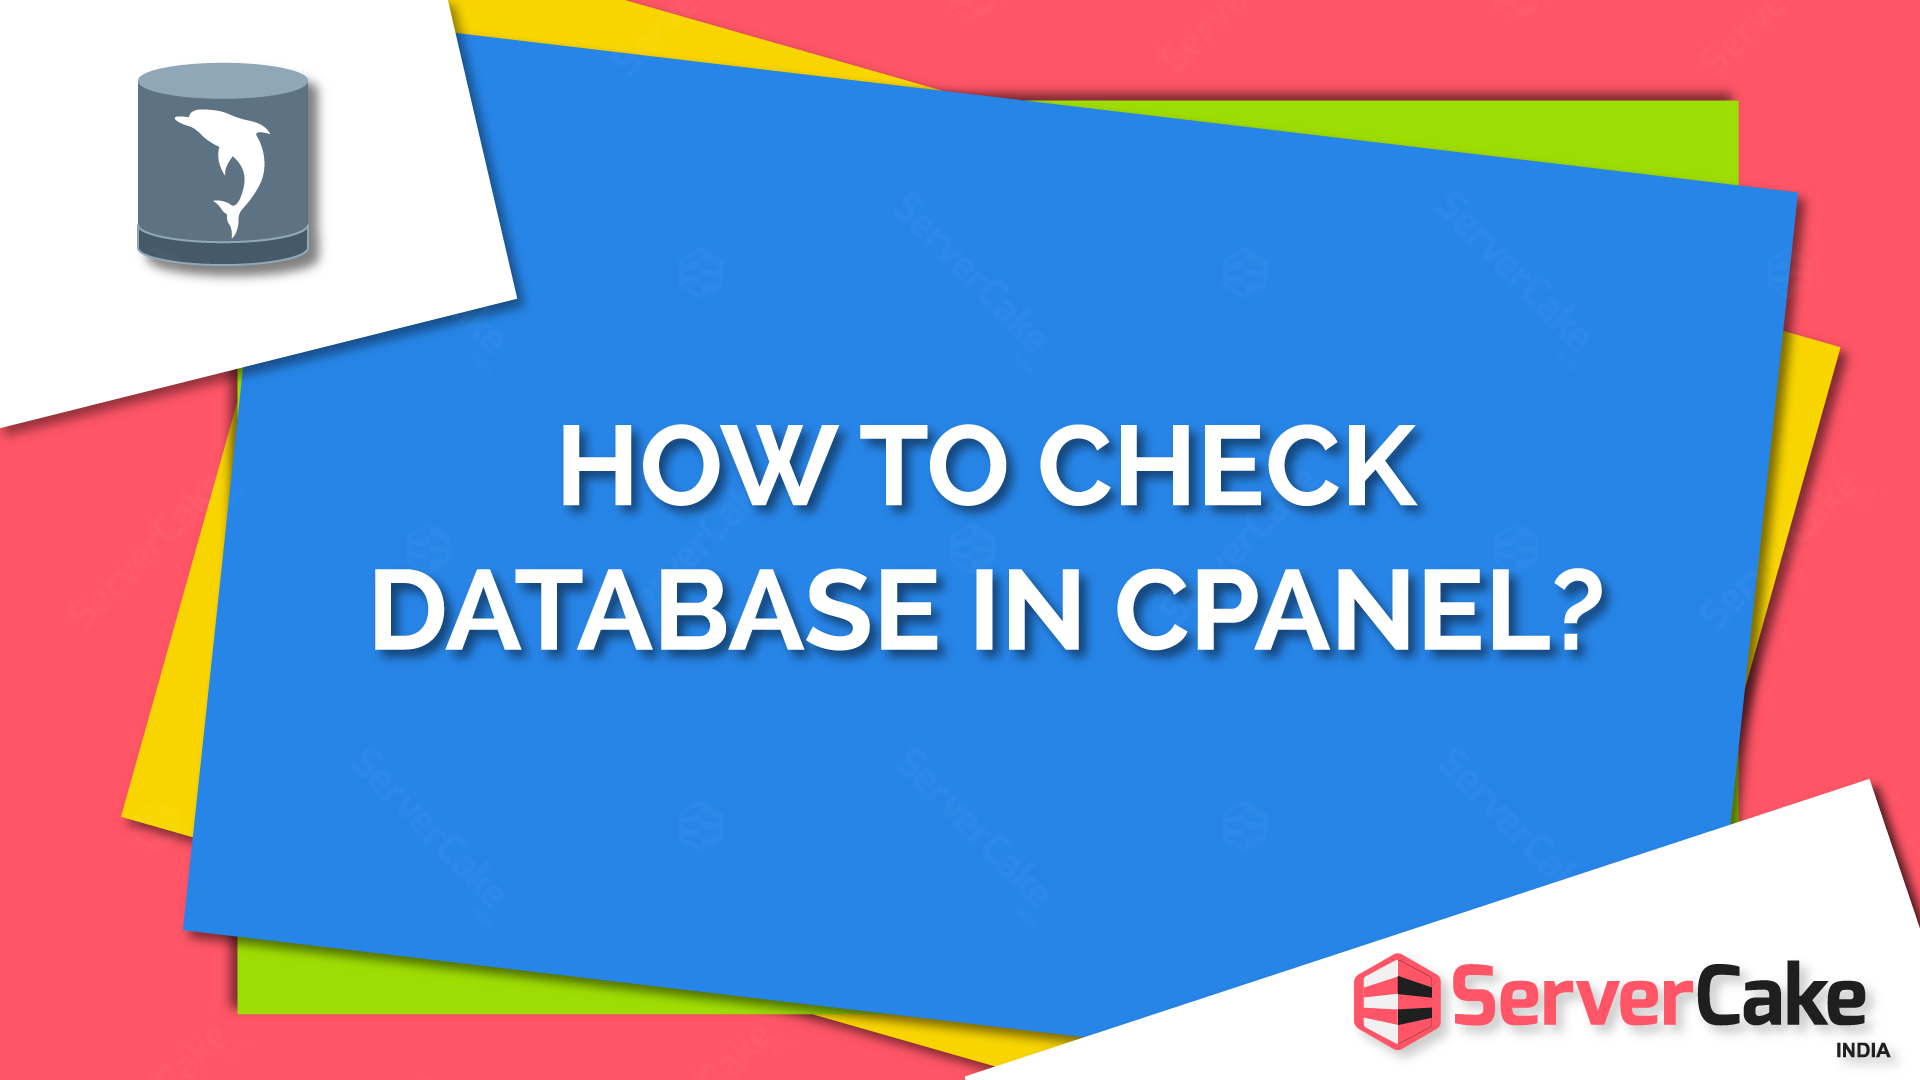 How to Check a Database in cPanel?